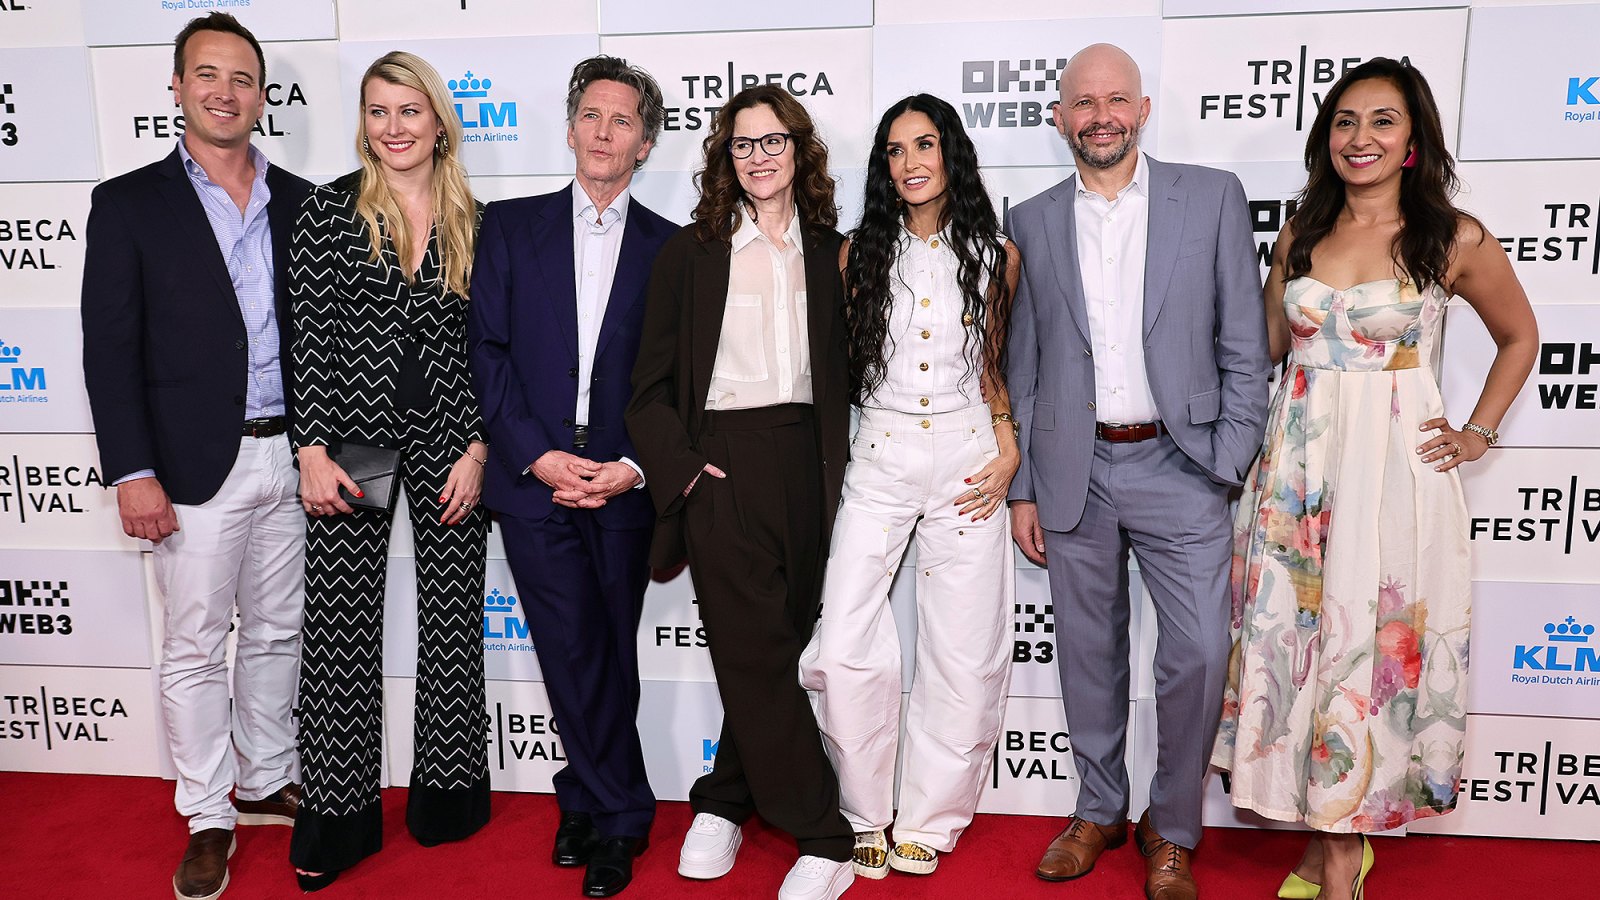 Andrew McCarthy, Demi Moore, Jon Cryer and More Have ‘Brat Pack’ Reunion